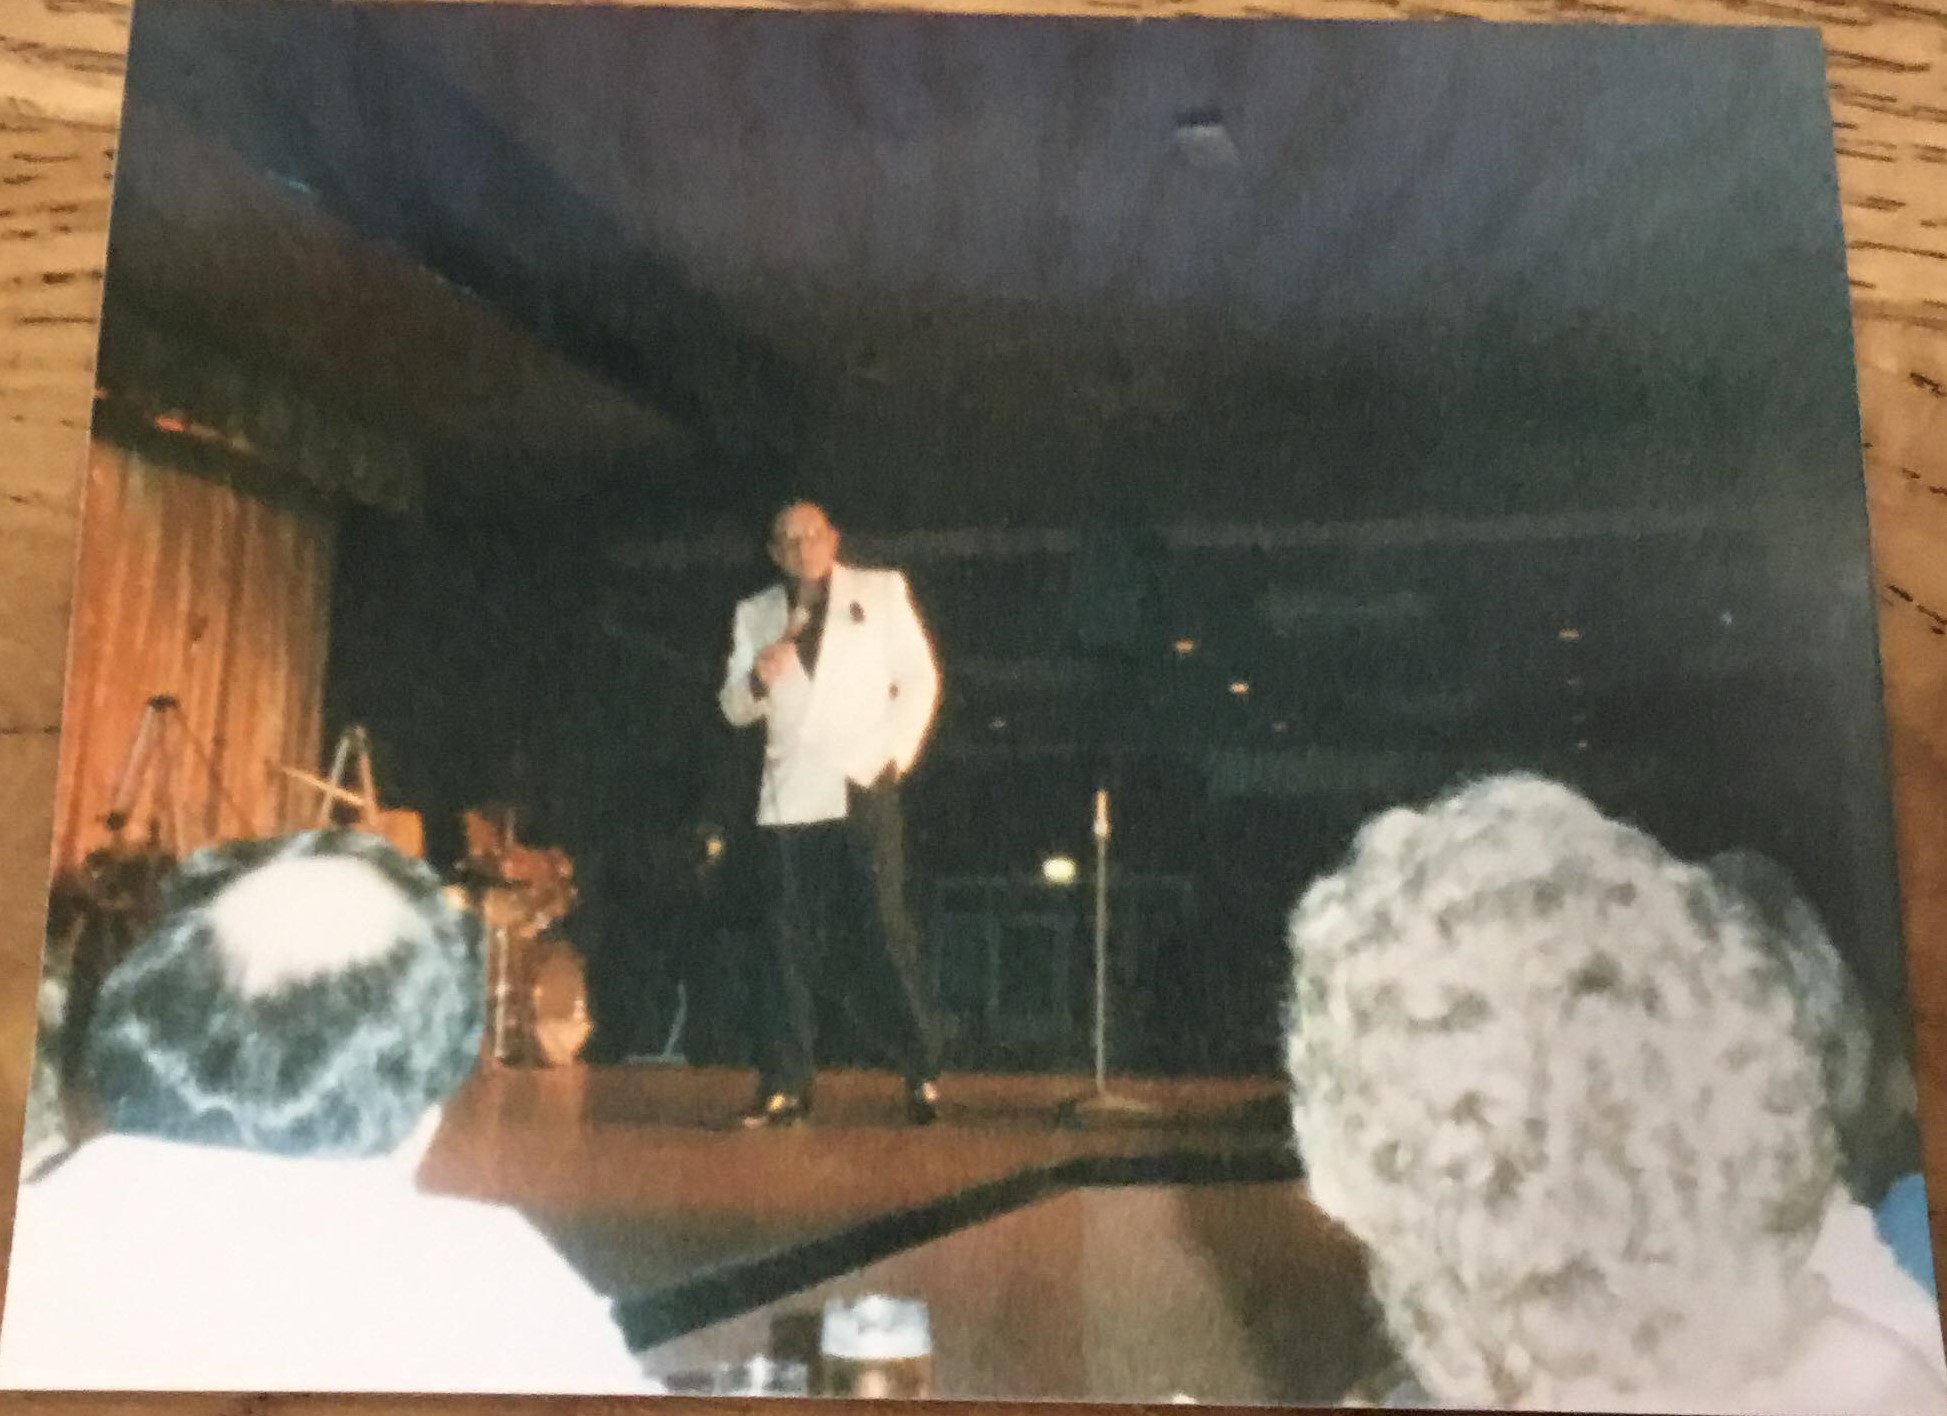 ommedian Mike Reid in Showbar in either 1988 or 1989